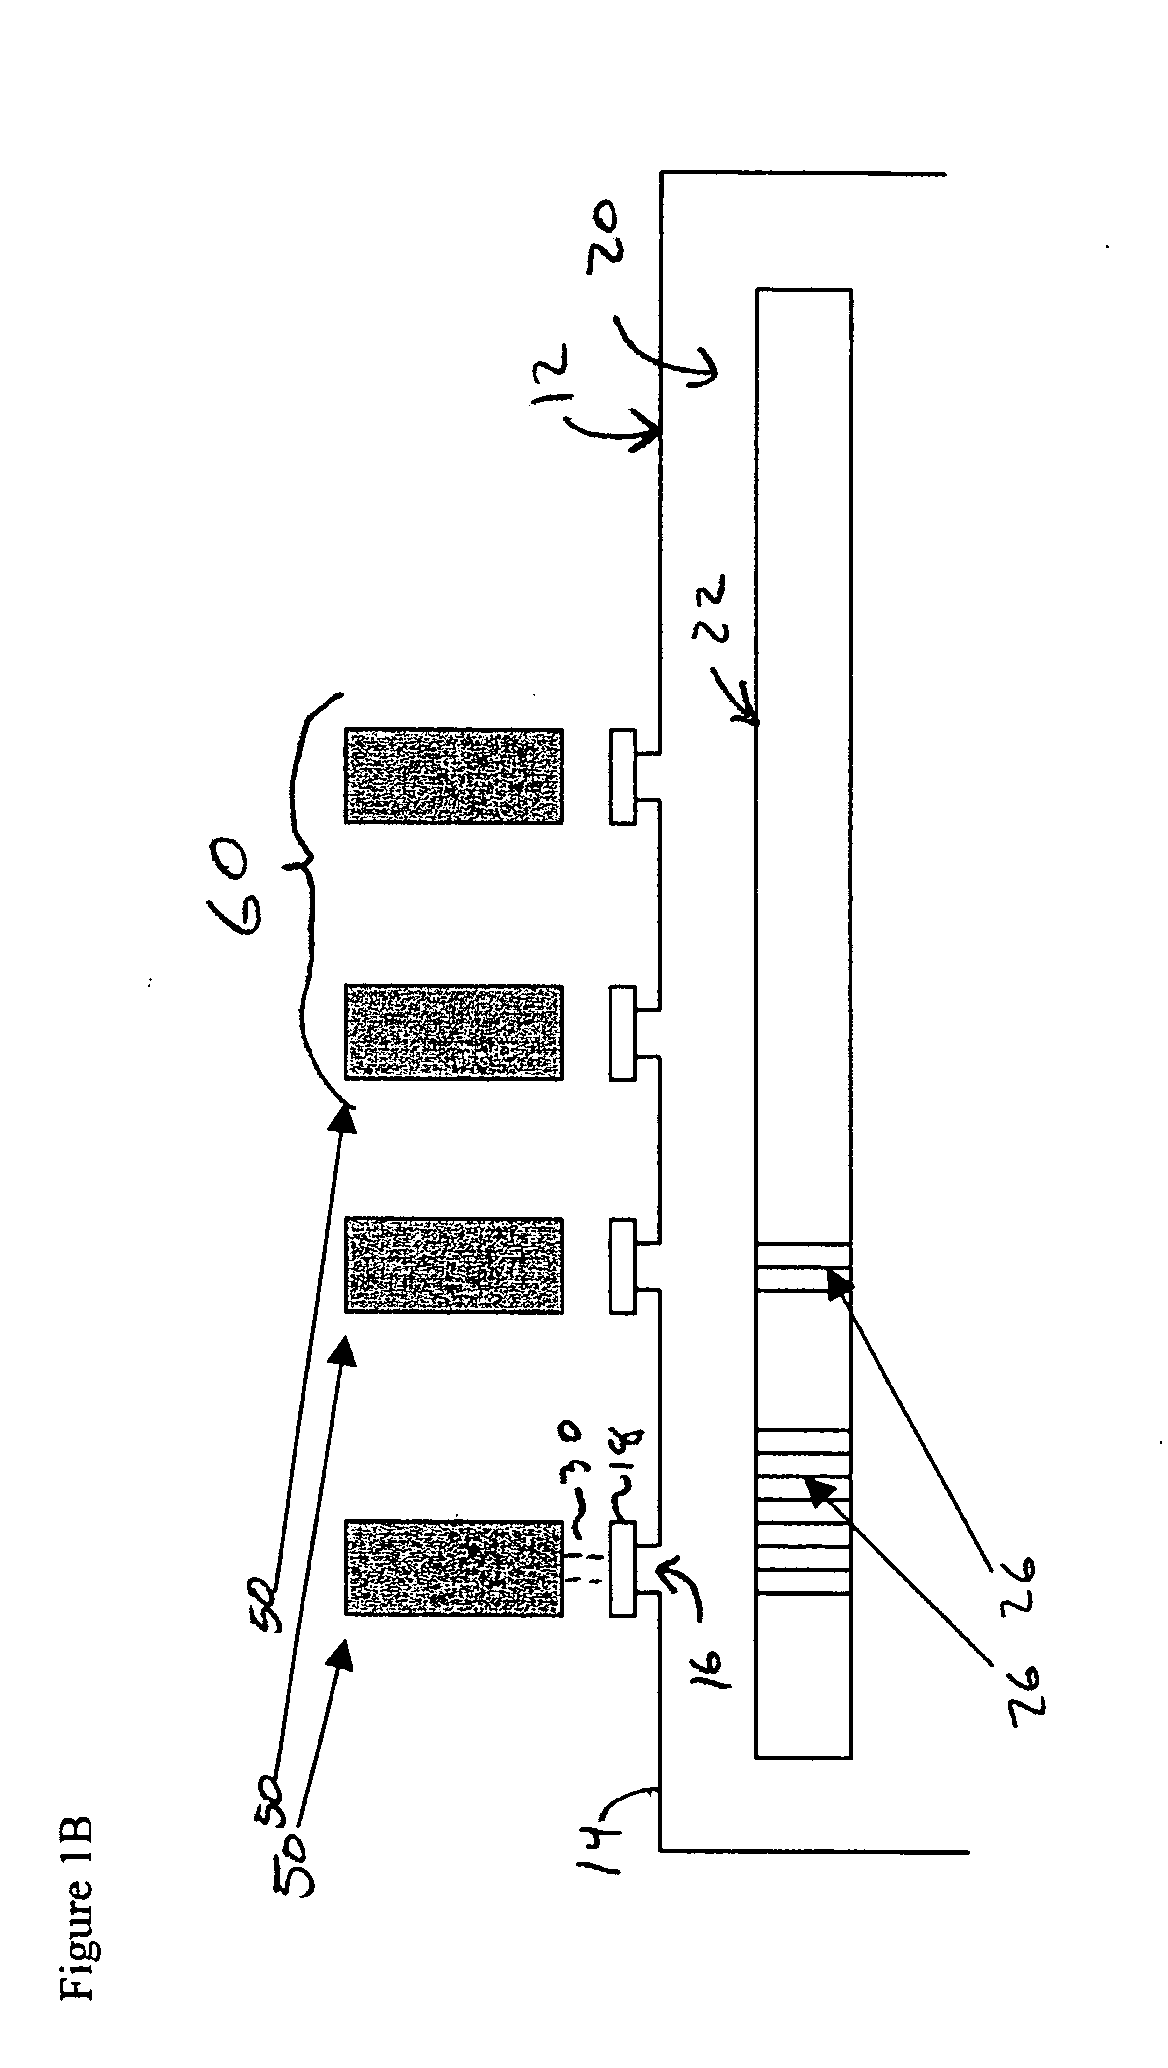 Devices, systems and methods for determining temperature and/or optical characteristics of a substrate